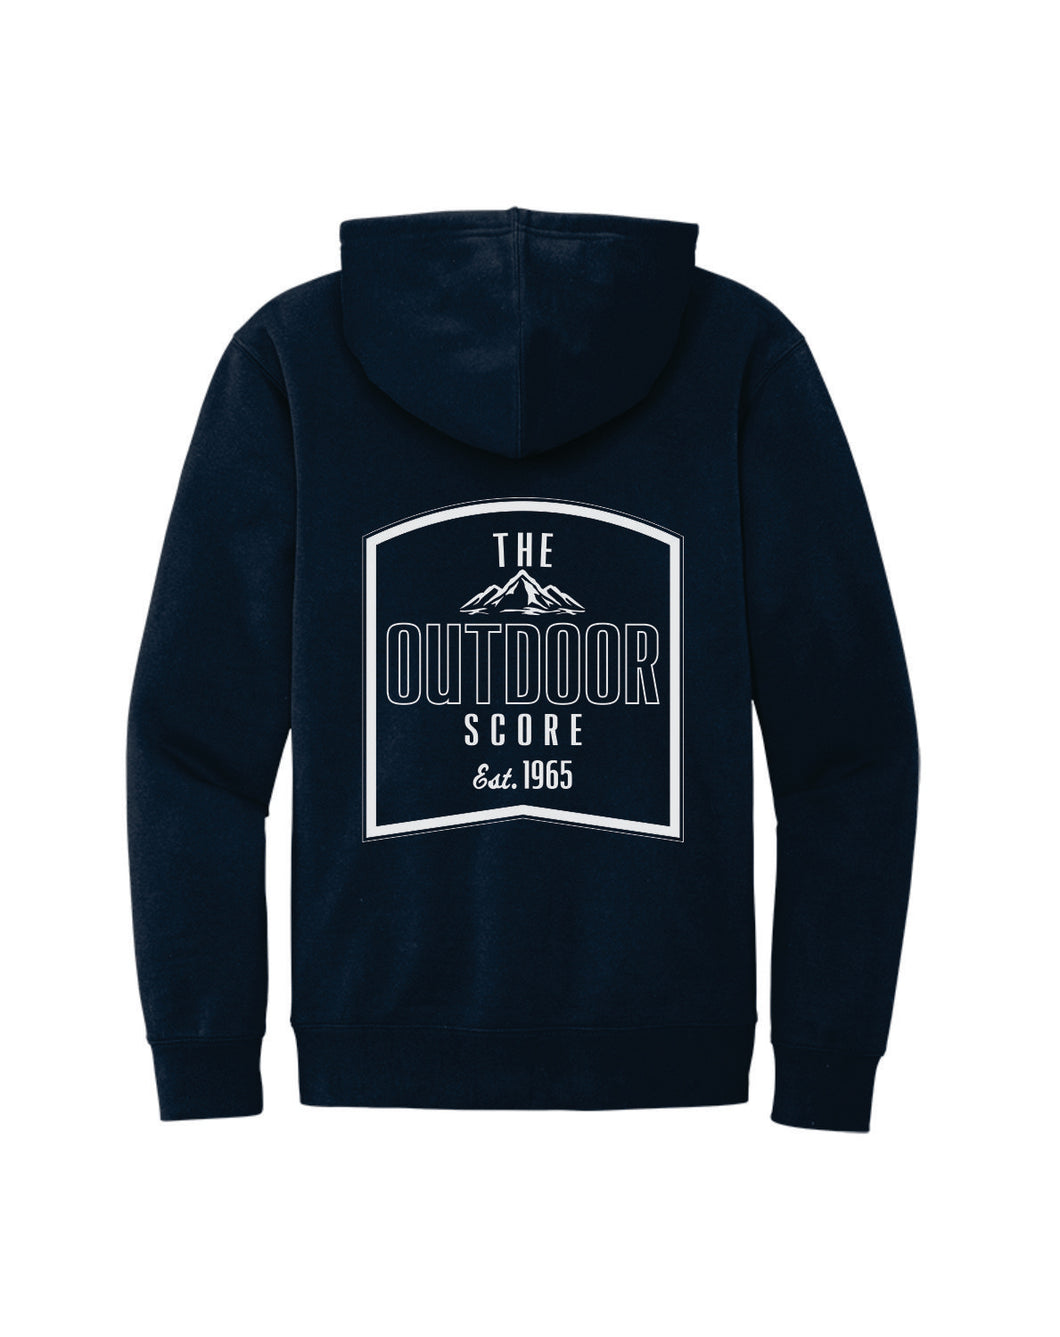 The Stag Hoodie